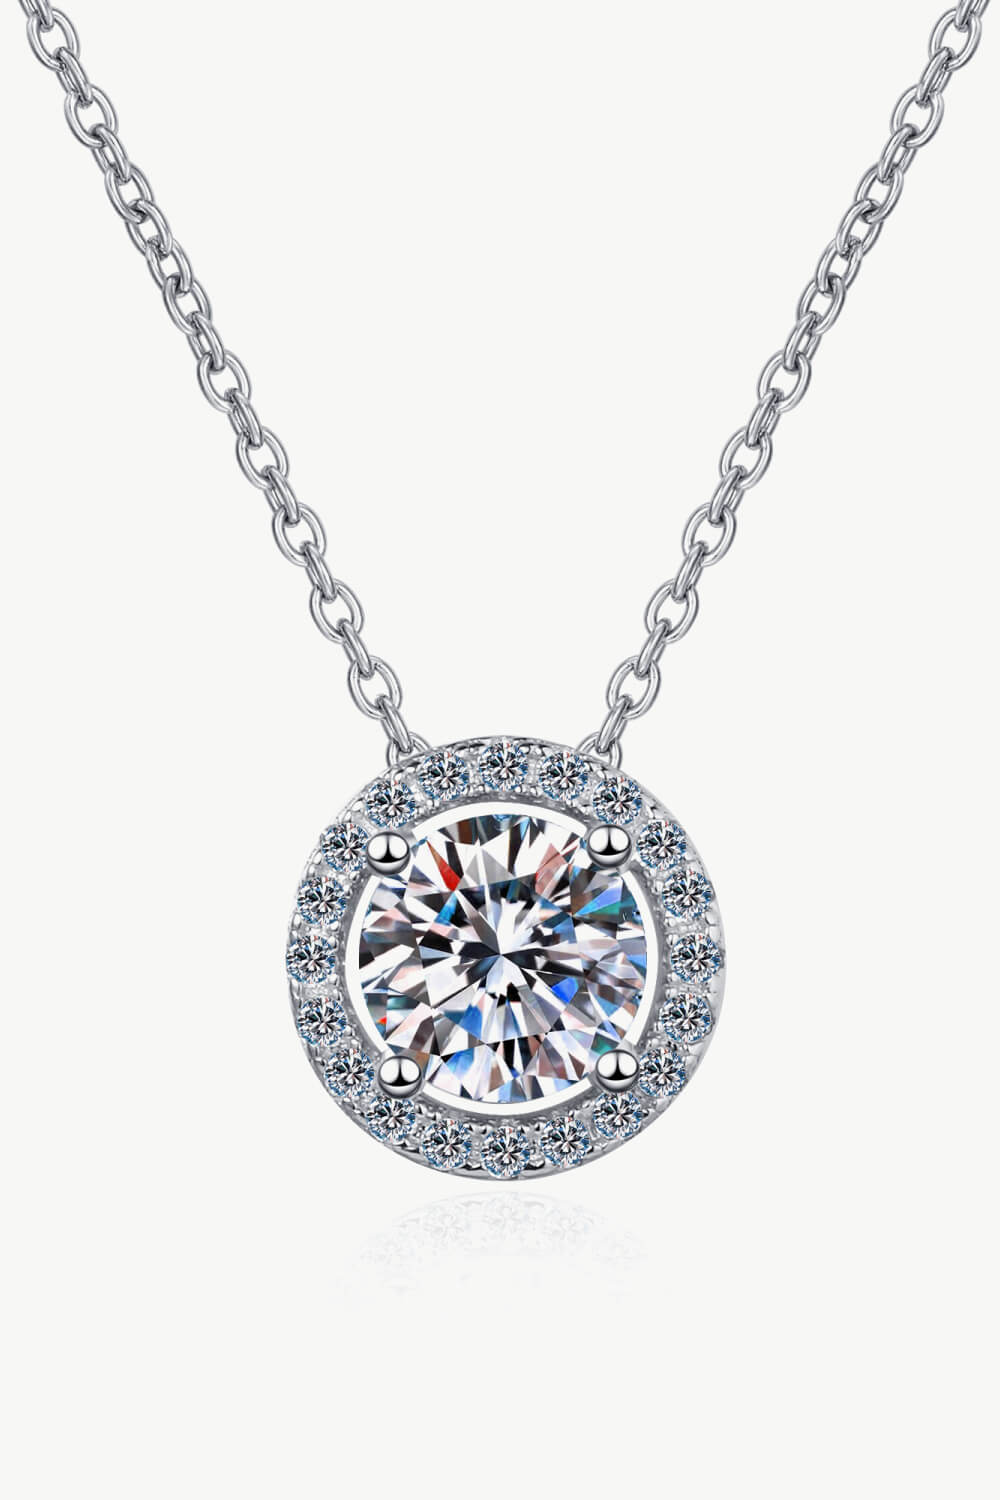 1 Carat Moissanite Round Pendant Chain Necklace - Necklaces - FITGGINS